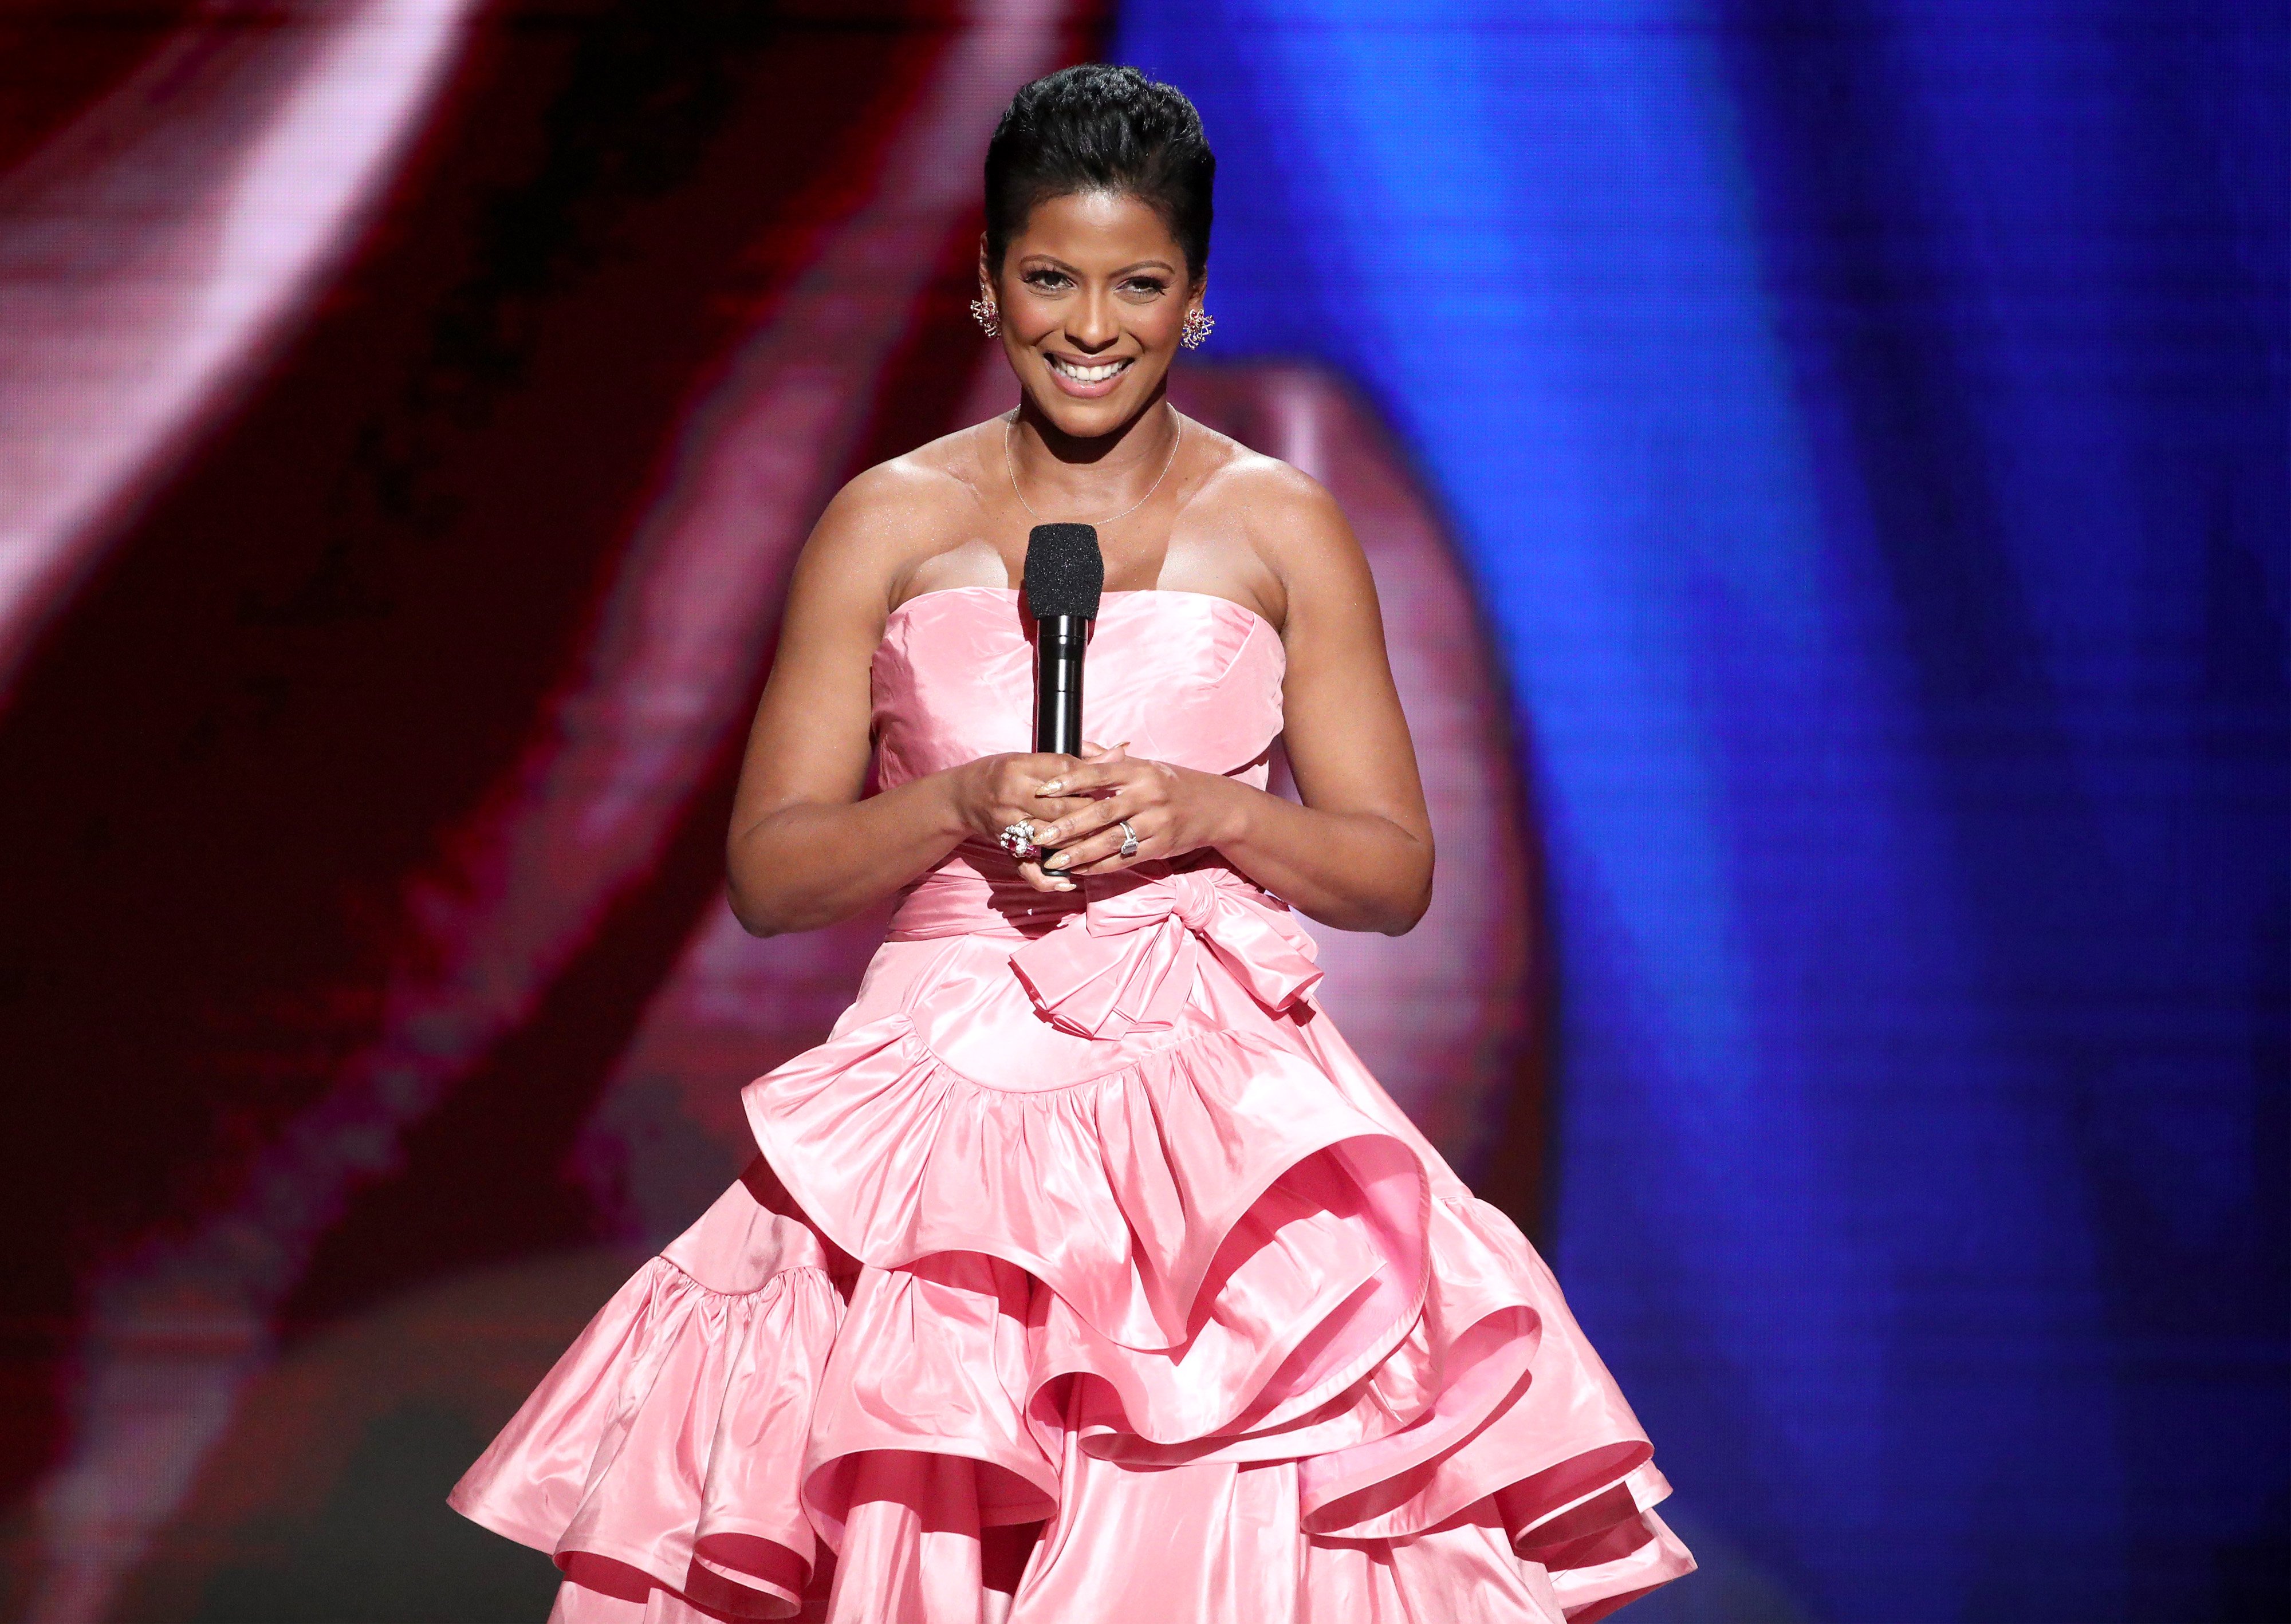 Tamron Hall speaks onstage during the 51st NAACP Image Awards, Presented by BET, at Pasadena Civic Auditorium on February 22, 2020 in Pasadena, California | Photo: GettyImages